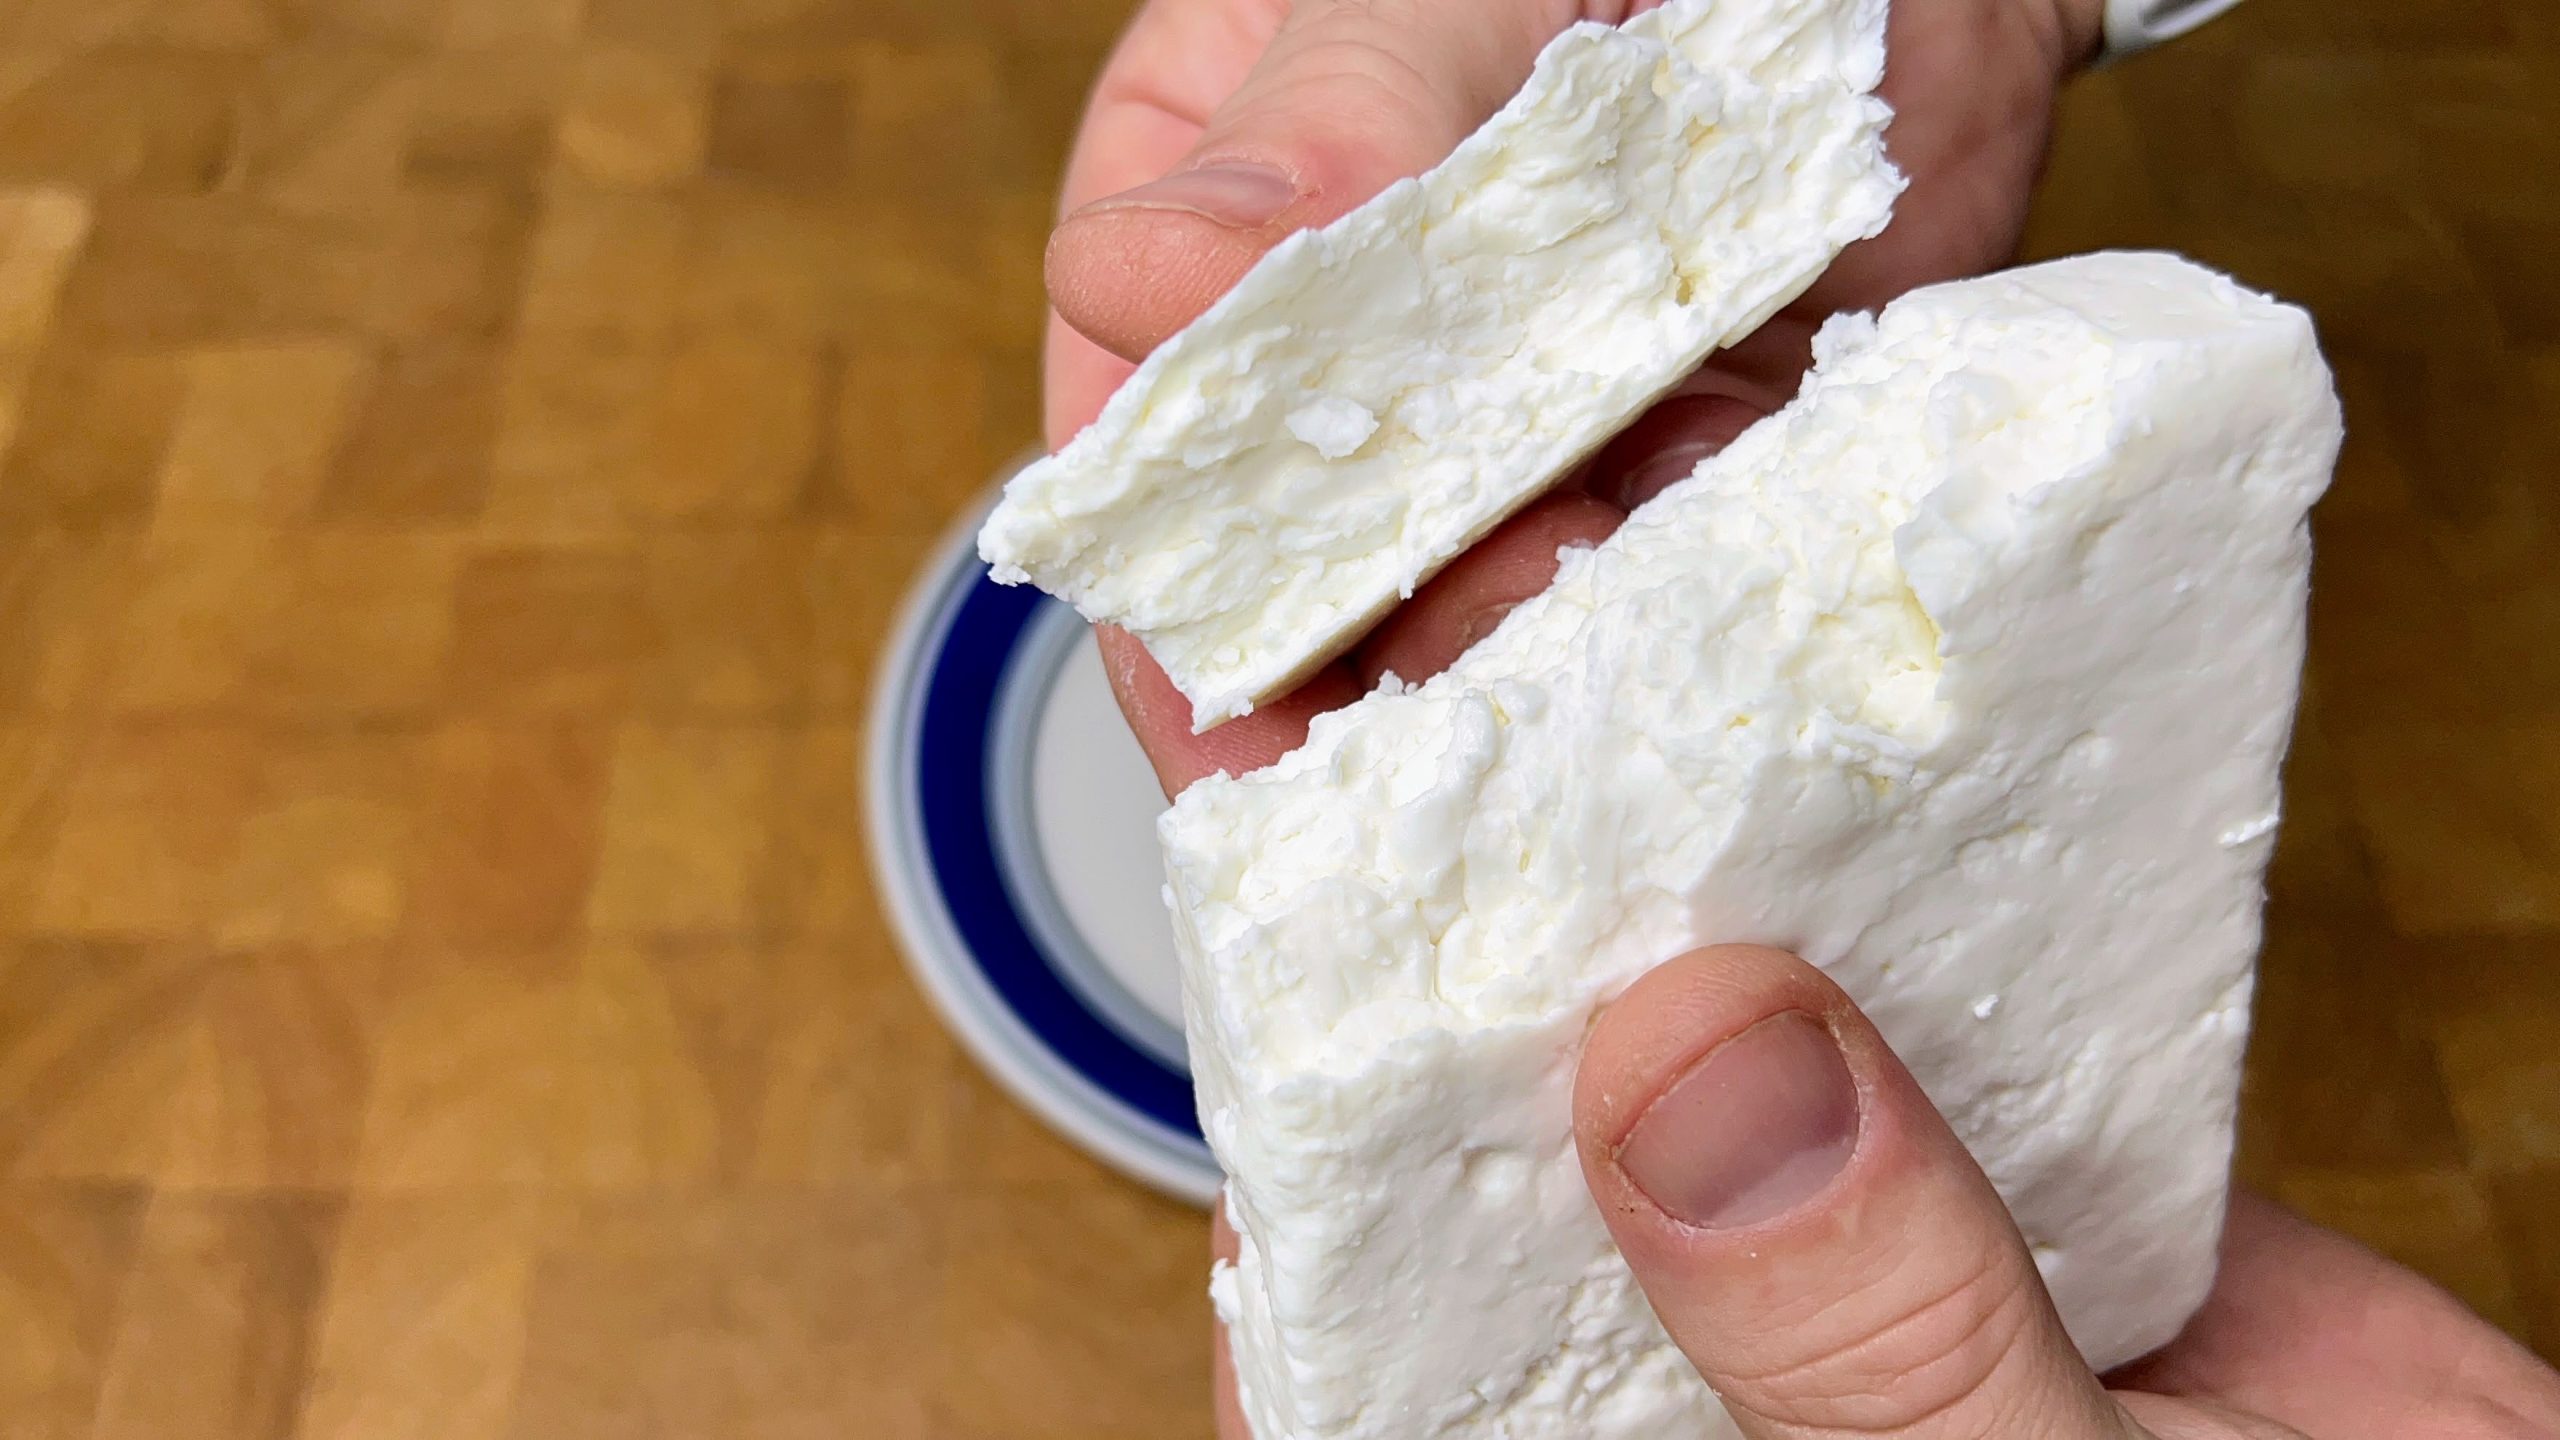 holding a block of defrosted feta cheese with a piece broken off